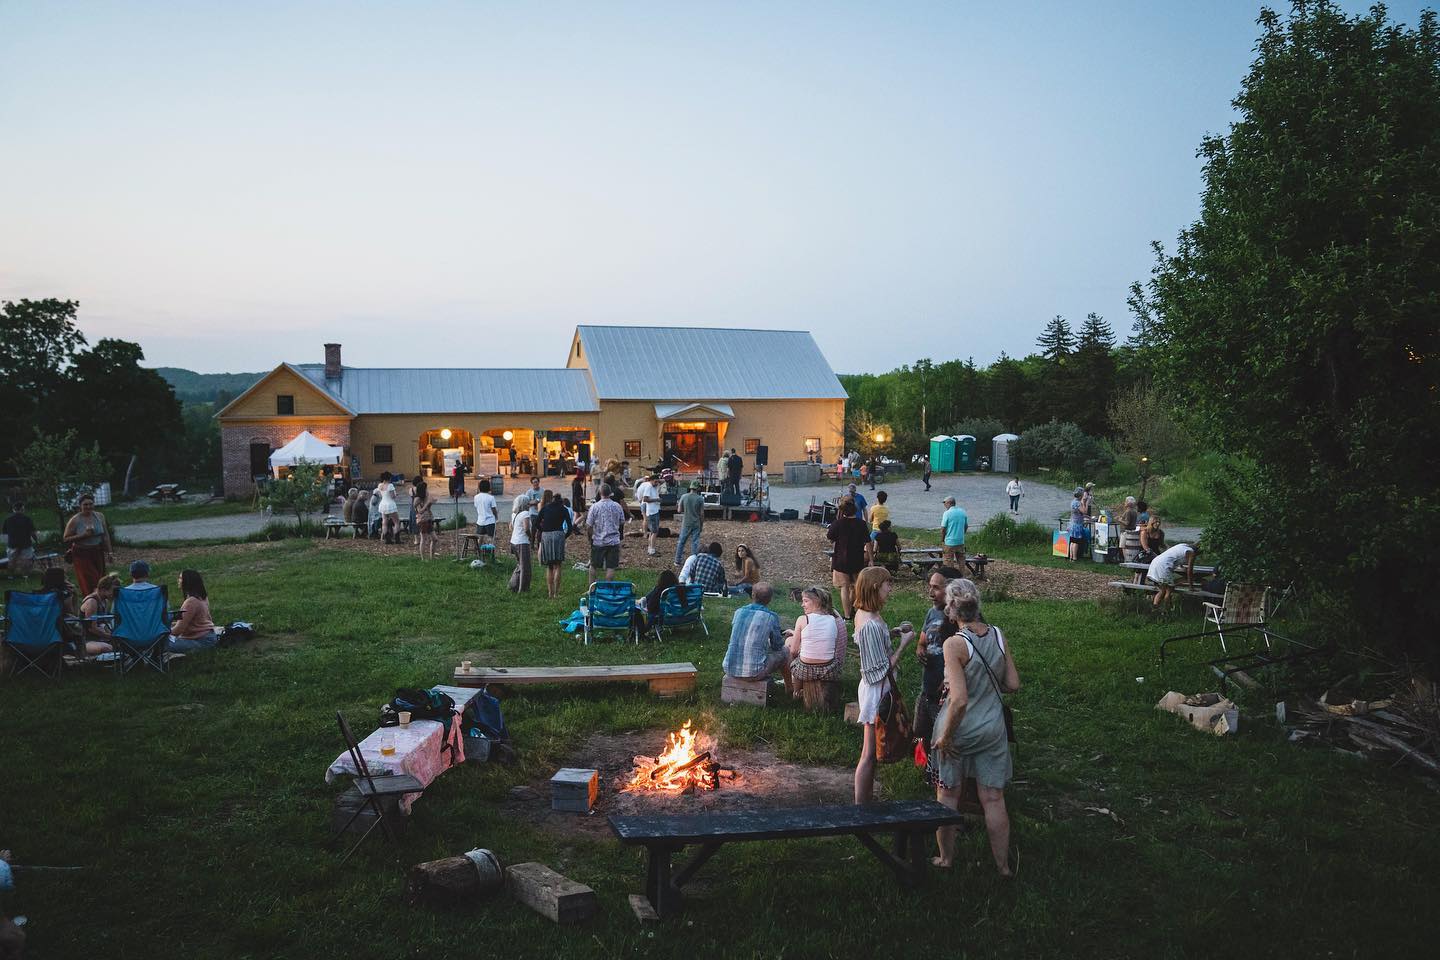 summer music at Vermont farms and vineyards